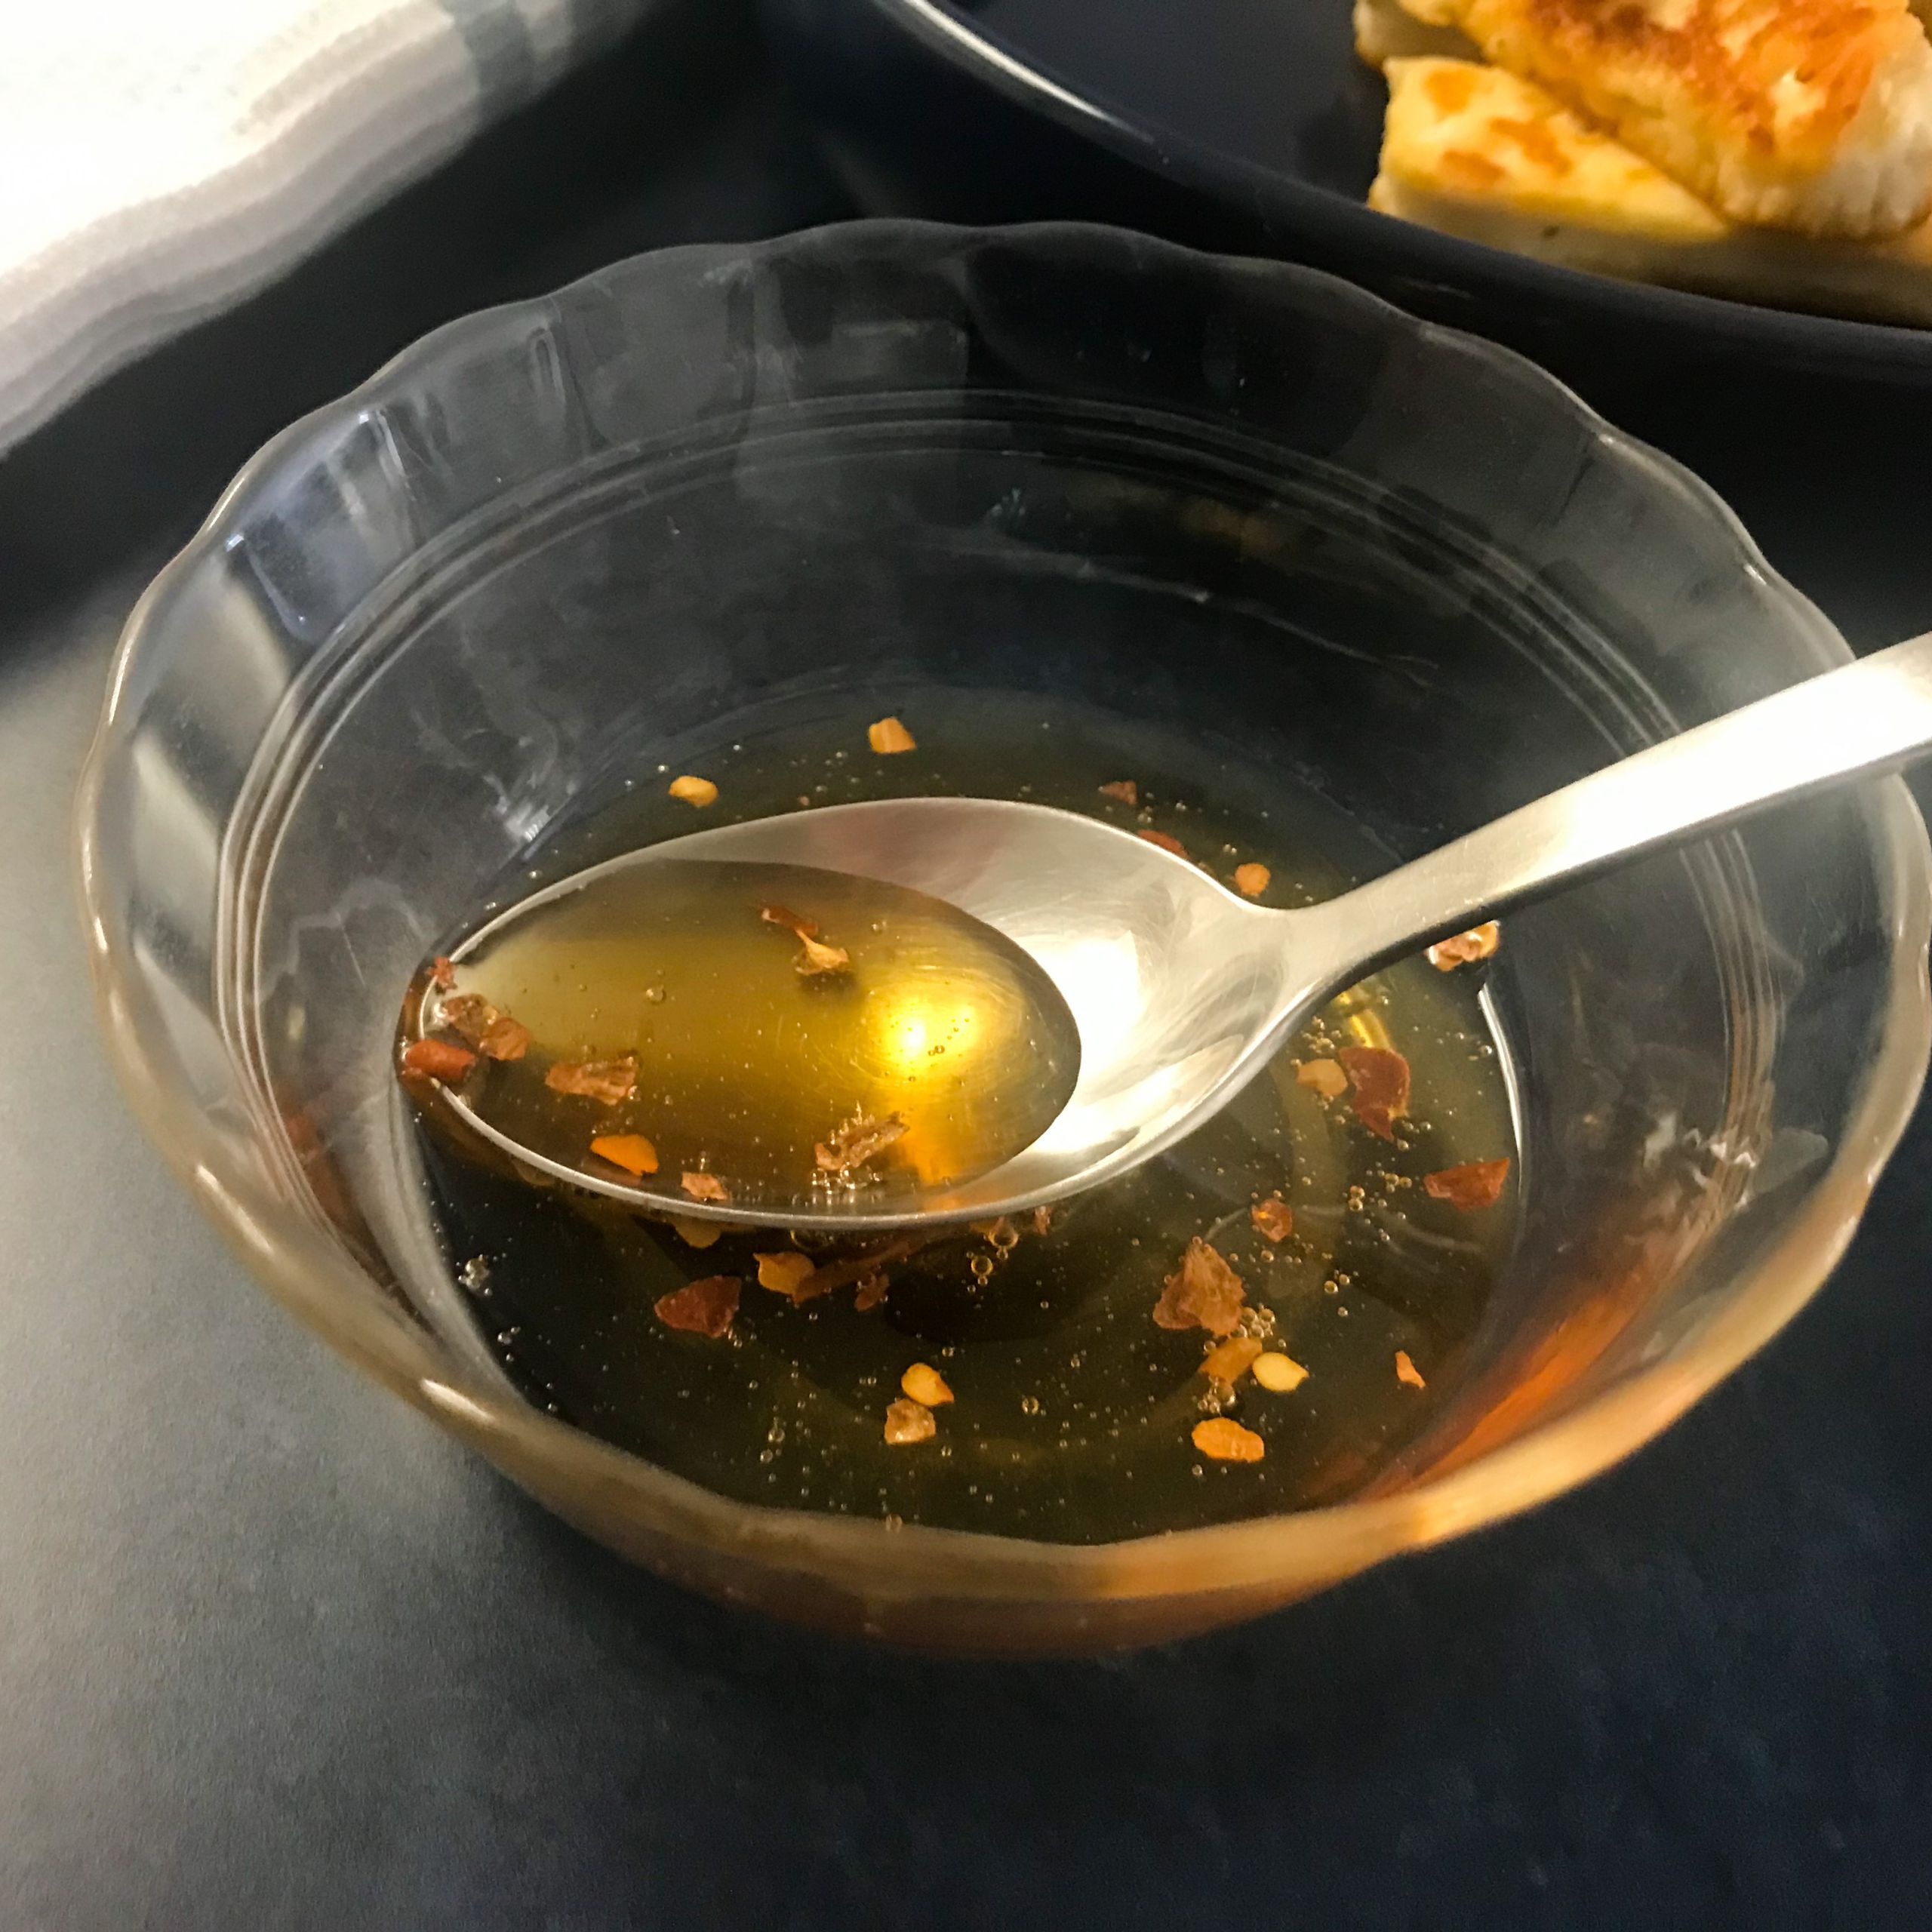 honey and chili flakes in a bowl